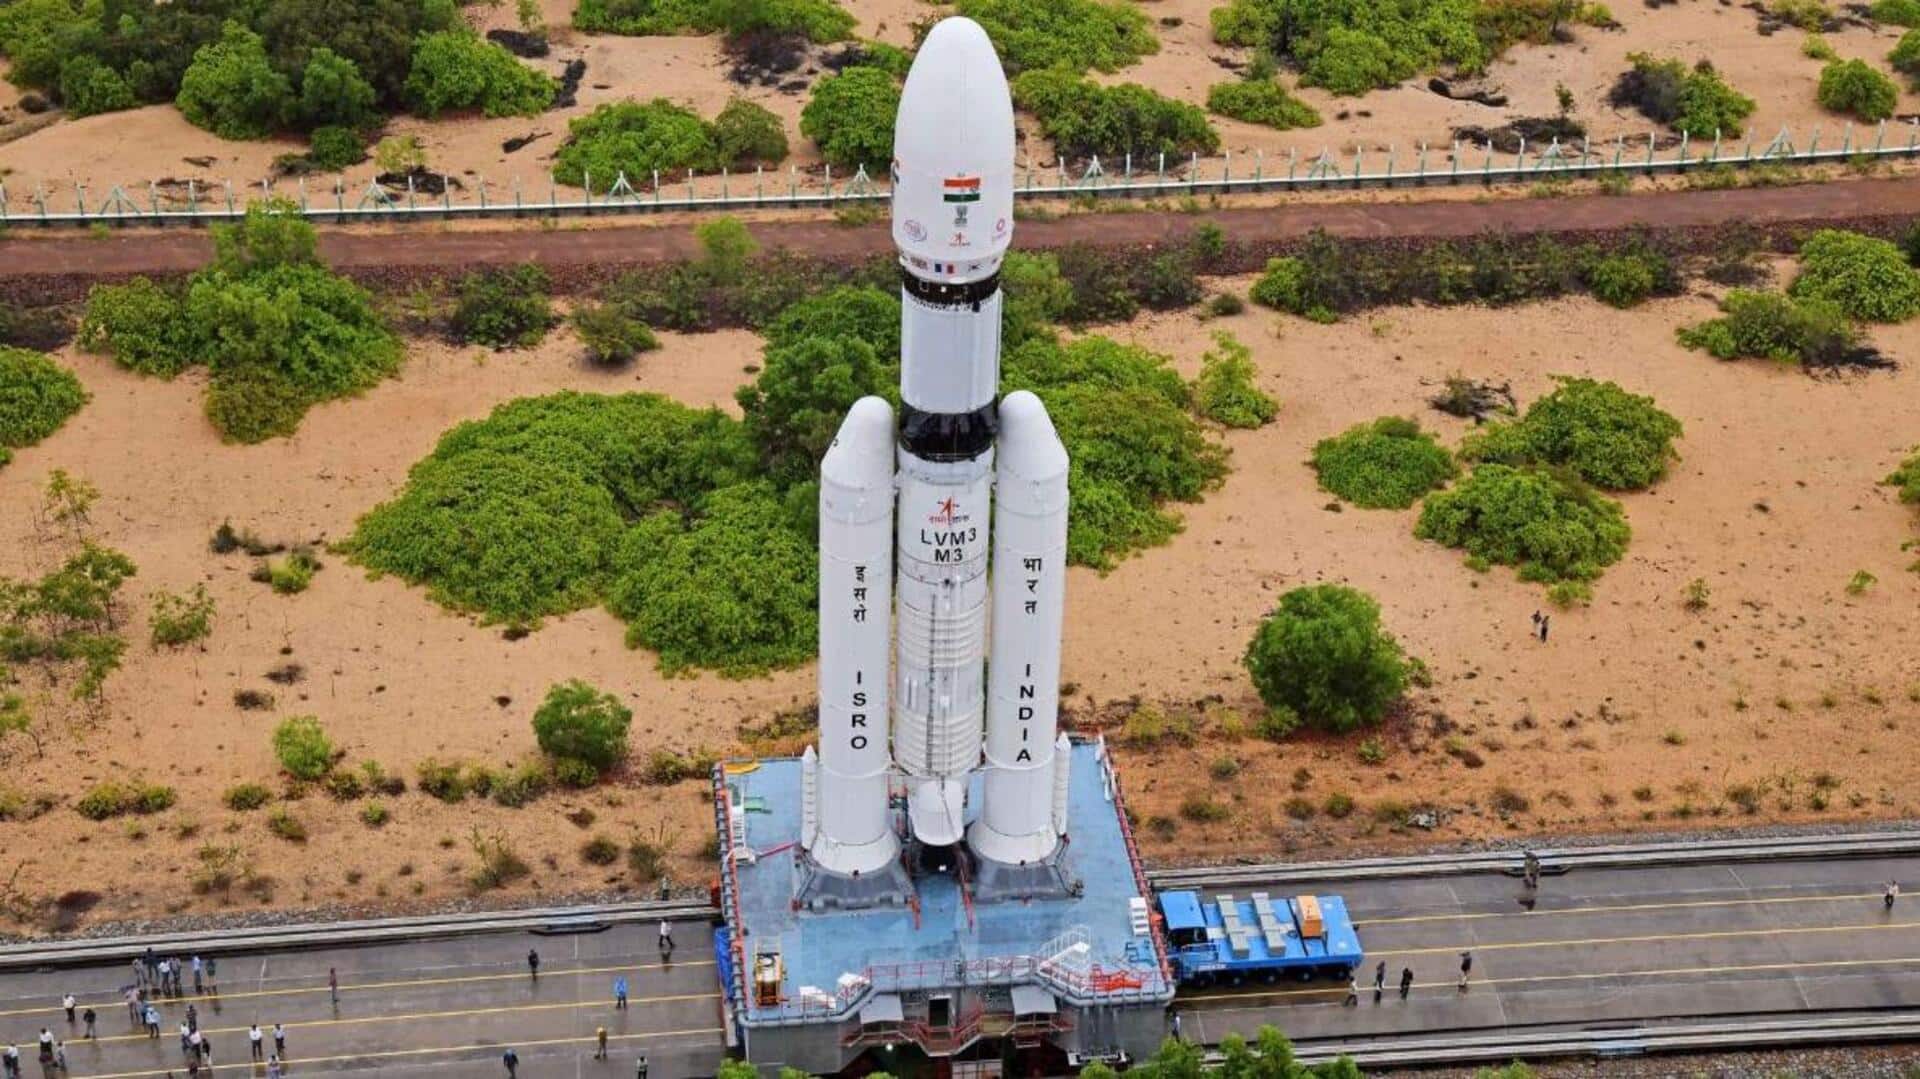 Key facts about LVM3, the rocket that will carry Chandrayaan-3